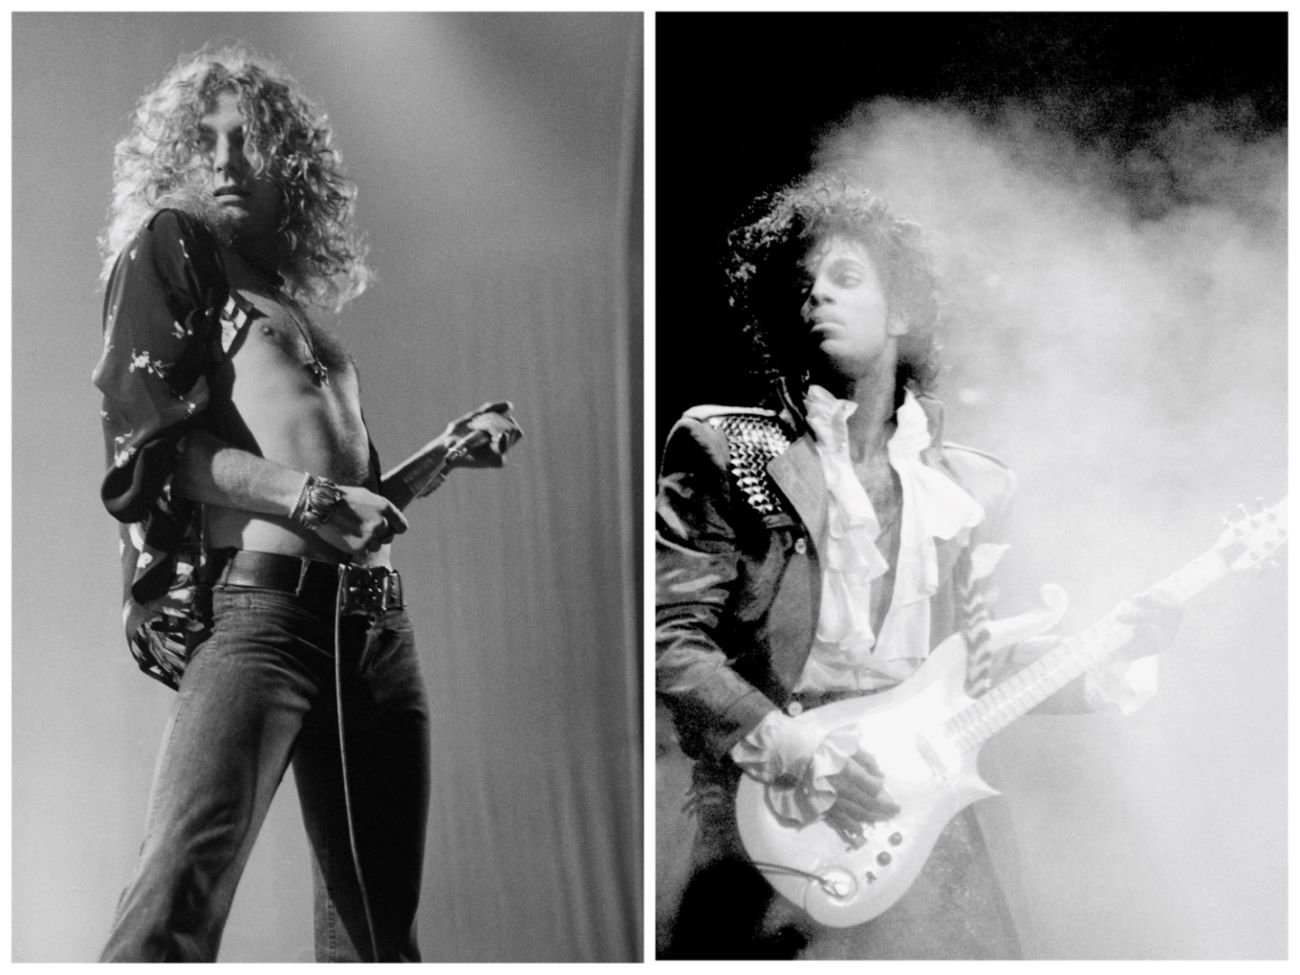 A black and white picture of Robert Plant holding a microphone with his shirt open. Prince plays guitar and wears a ruffled shirt and jacket.